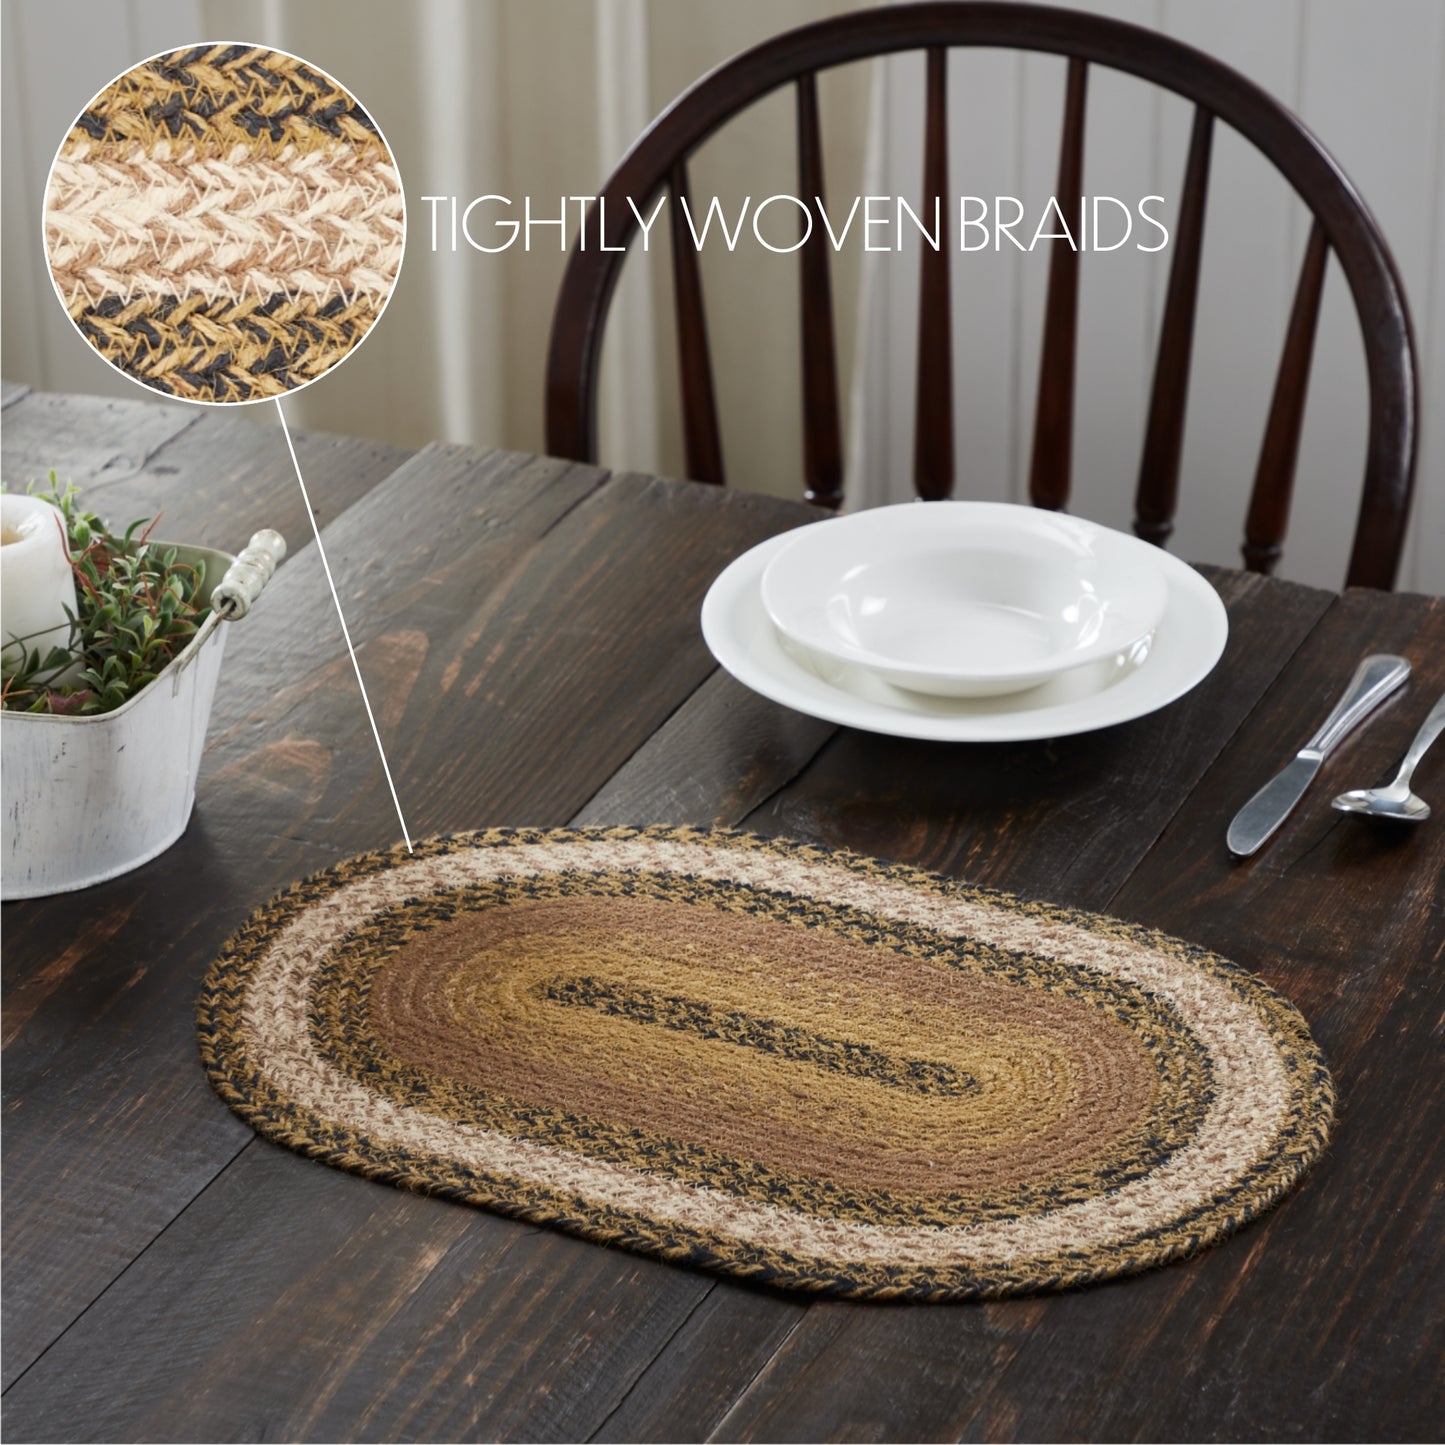 81387-Kettle-Grove-Jute-Oval-Placemat-12x18-image-2